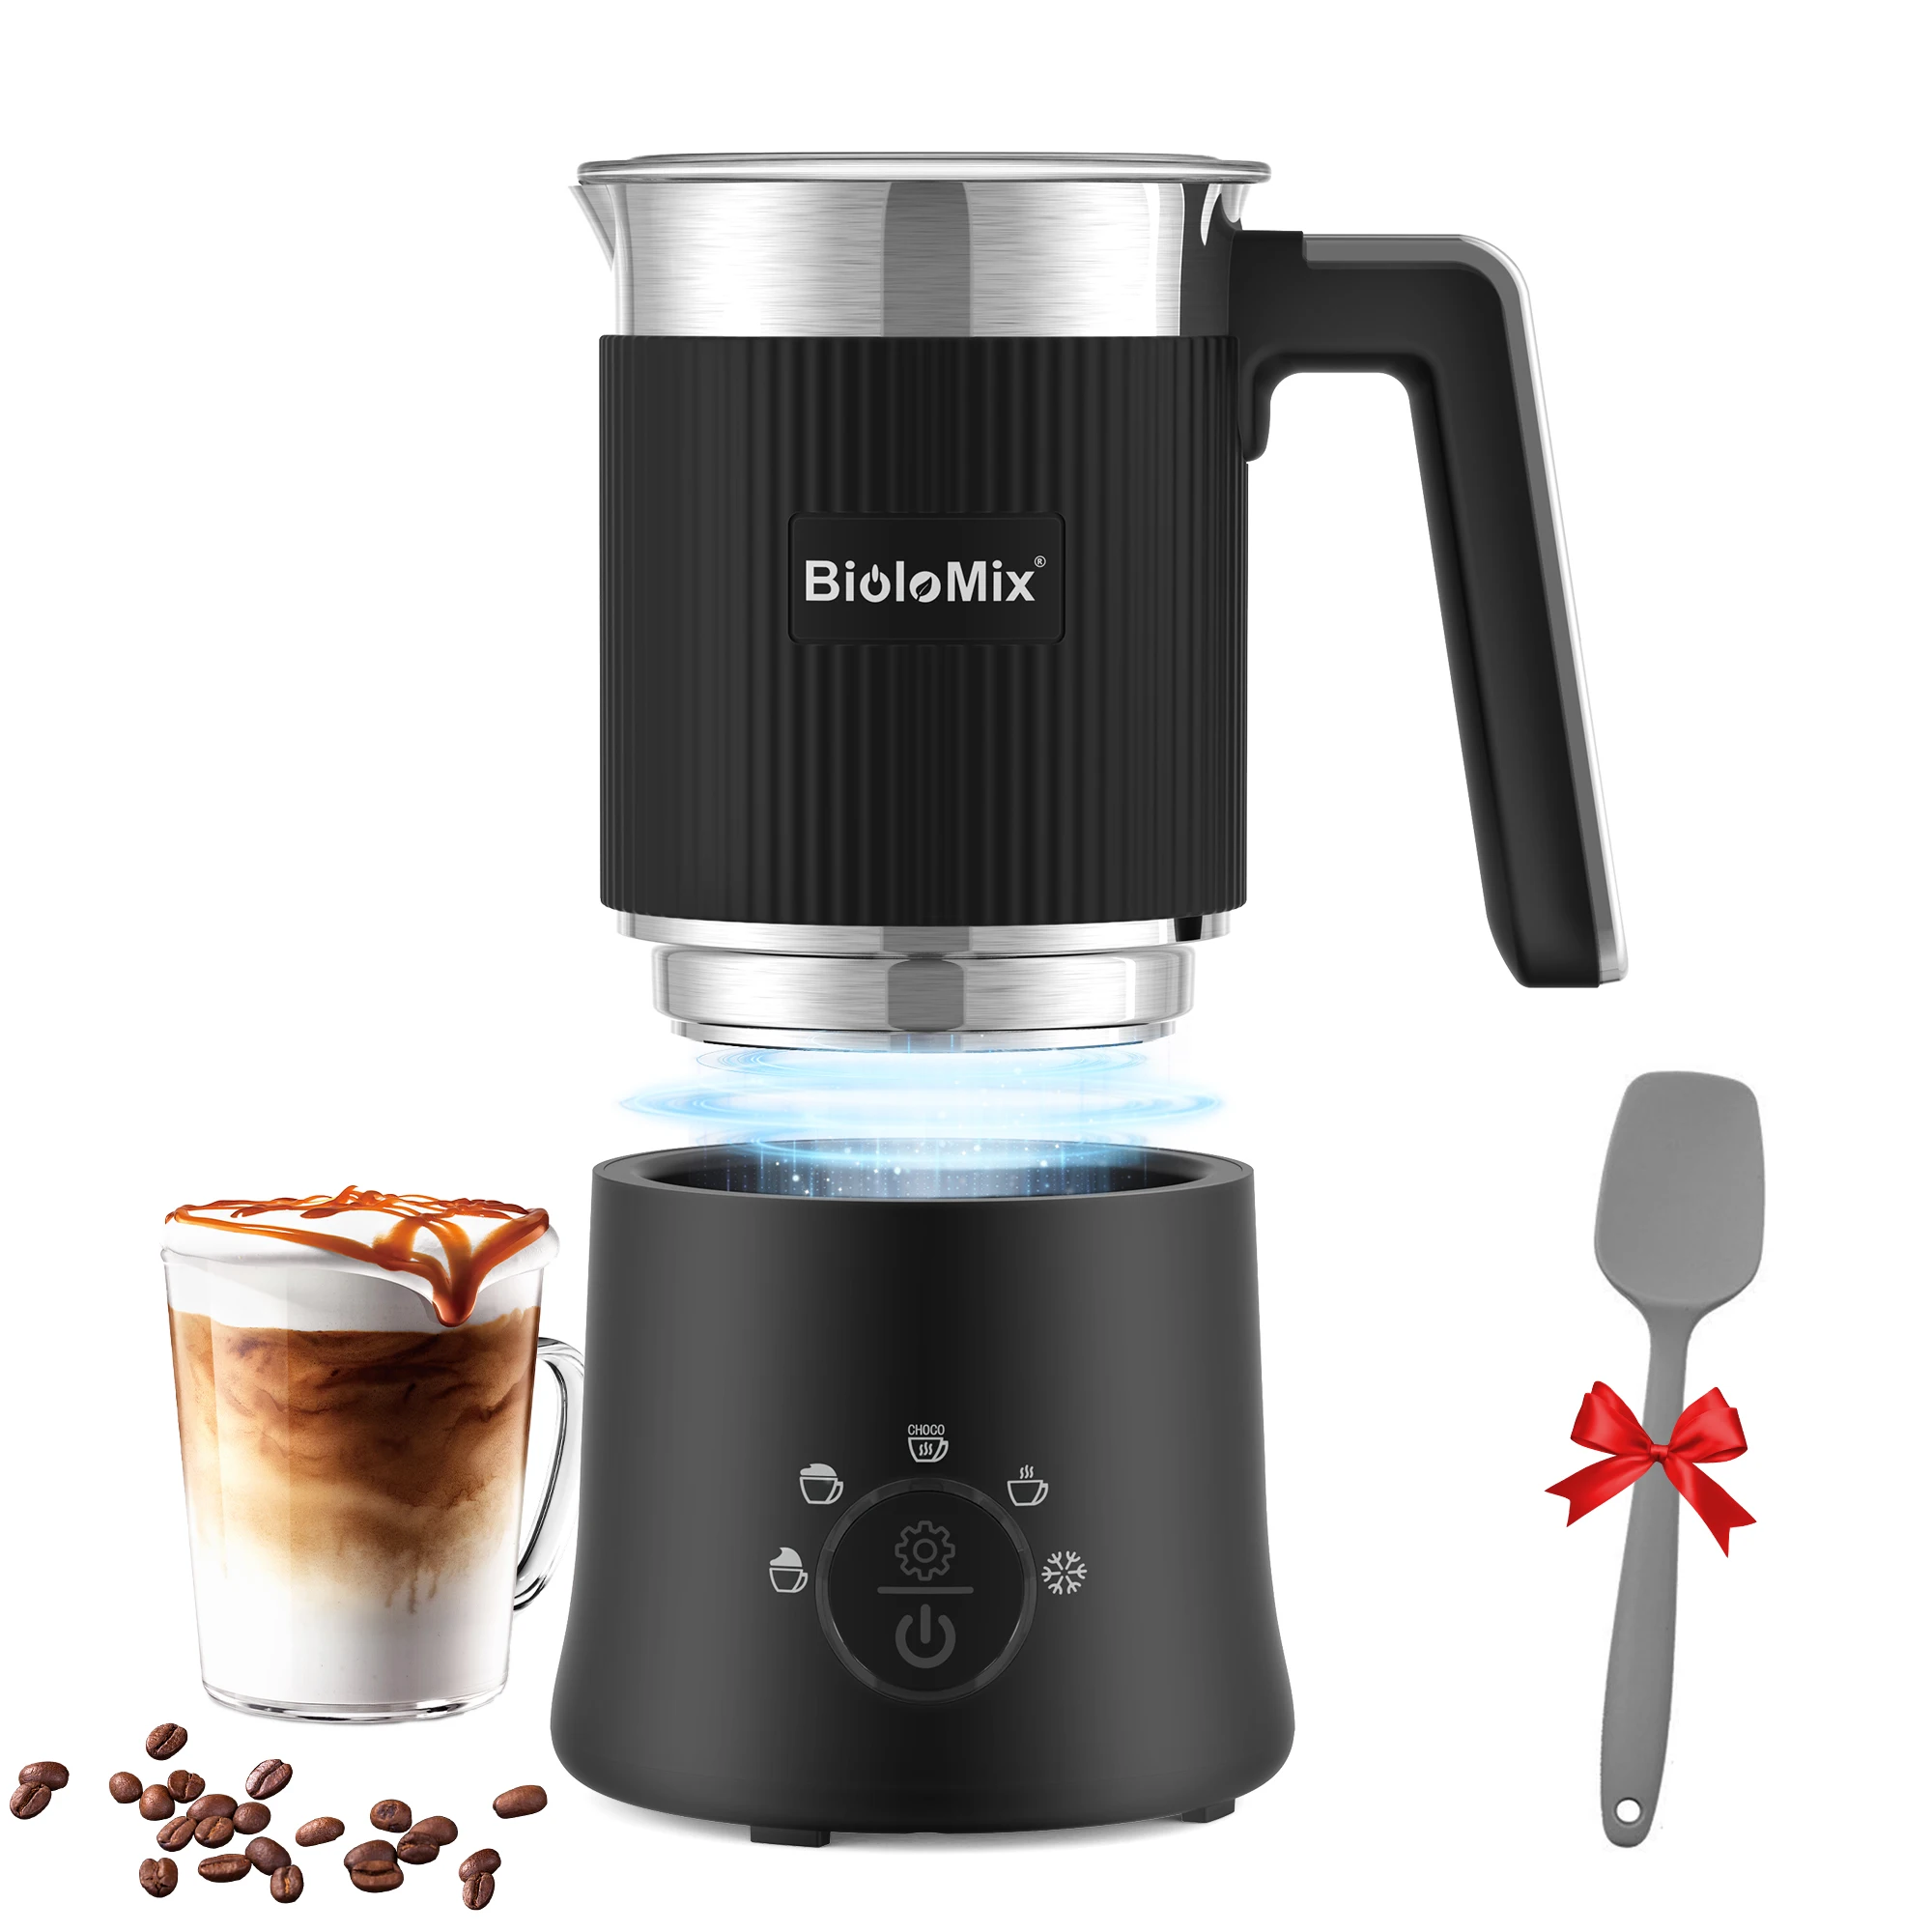 https://ae01.alicdn.com/kf/Scbf370dbc6054f3892035a9c385d88d2V/5-in-1-Detachable-Milk-Frother-Frothing-Foamer-Automatic-Milk-Warmer-Cold-Hot-Latte-Cappuccino-Chocolate.jpg